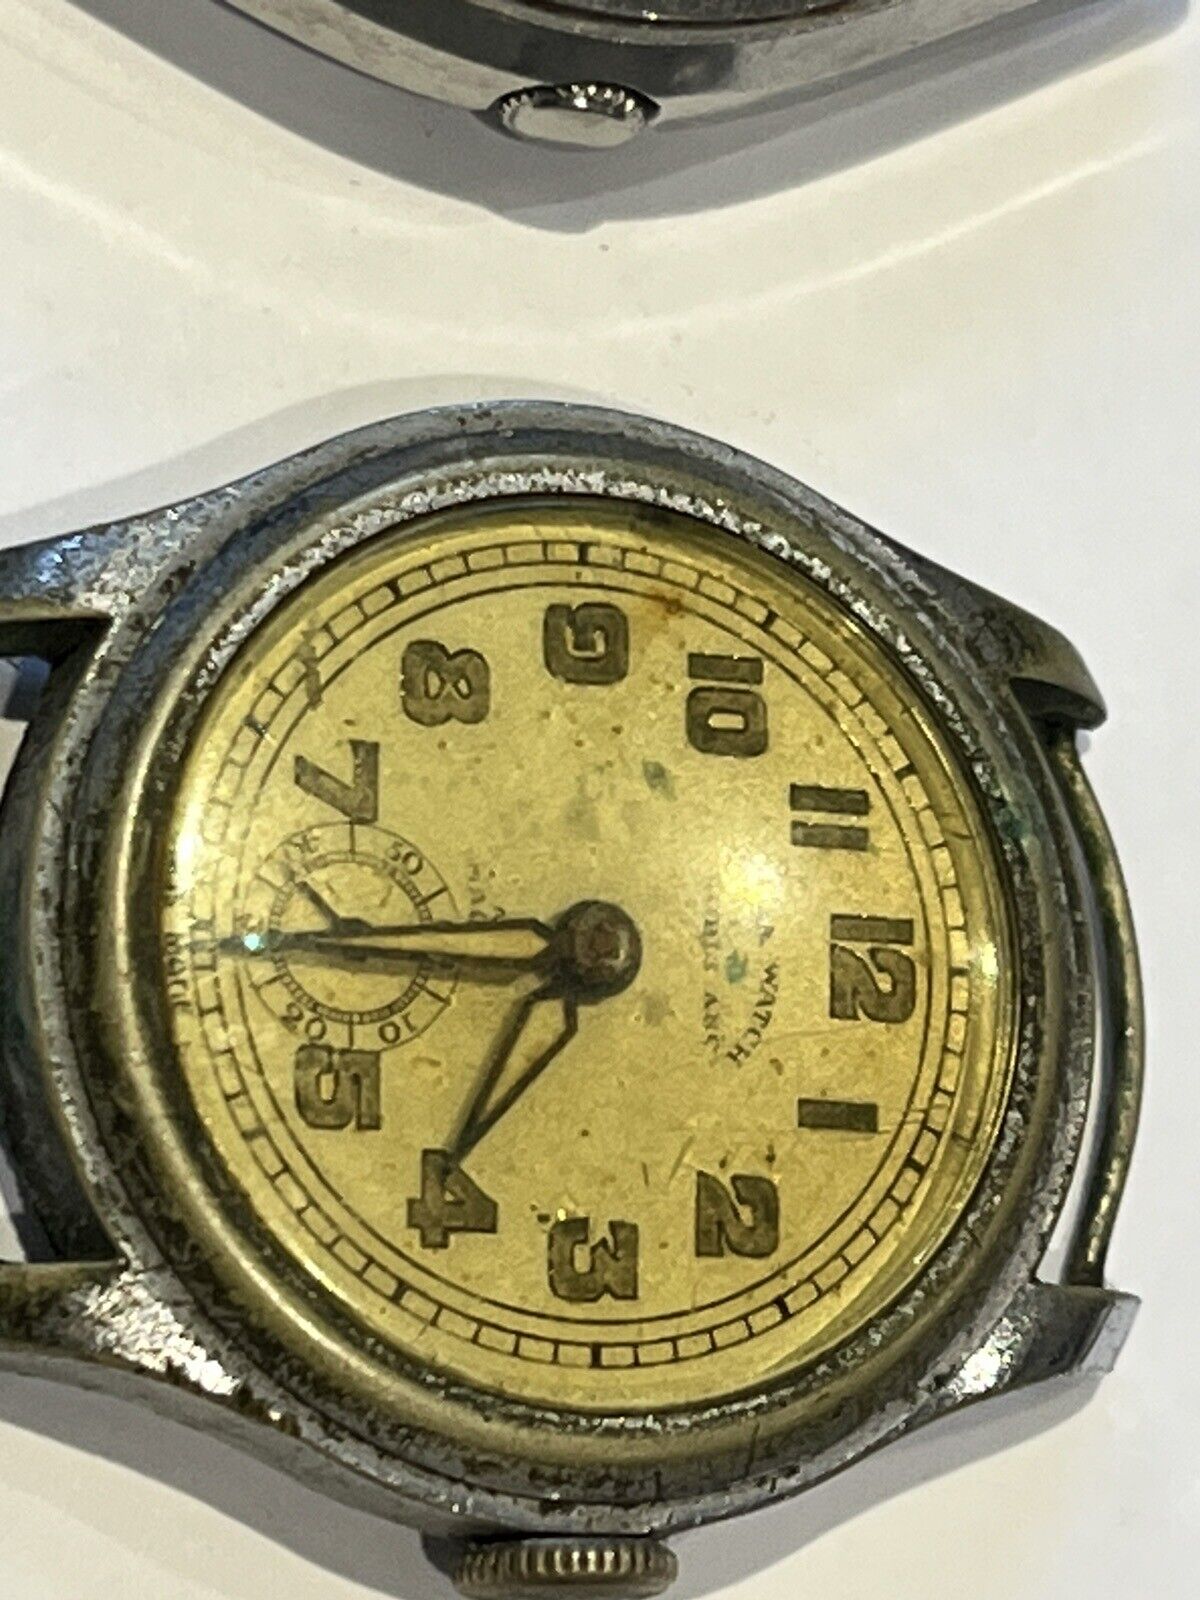 Vintage Men's Watch Collection